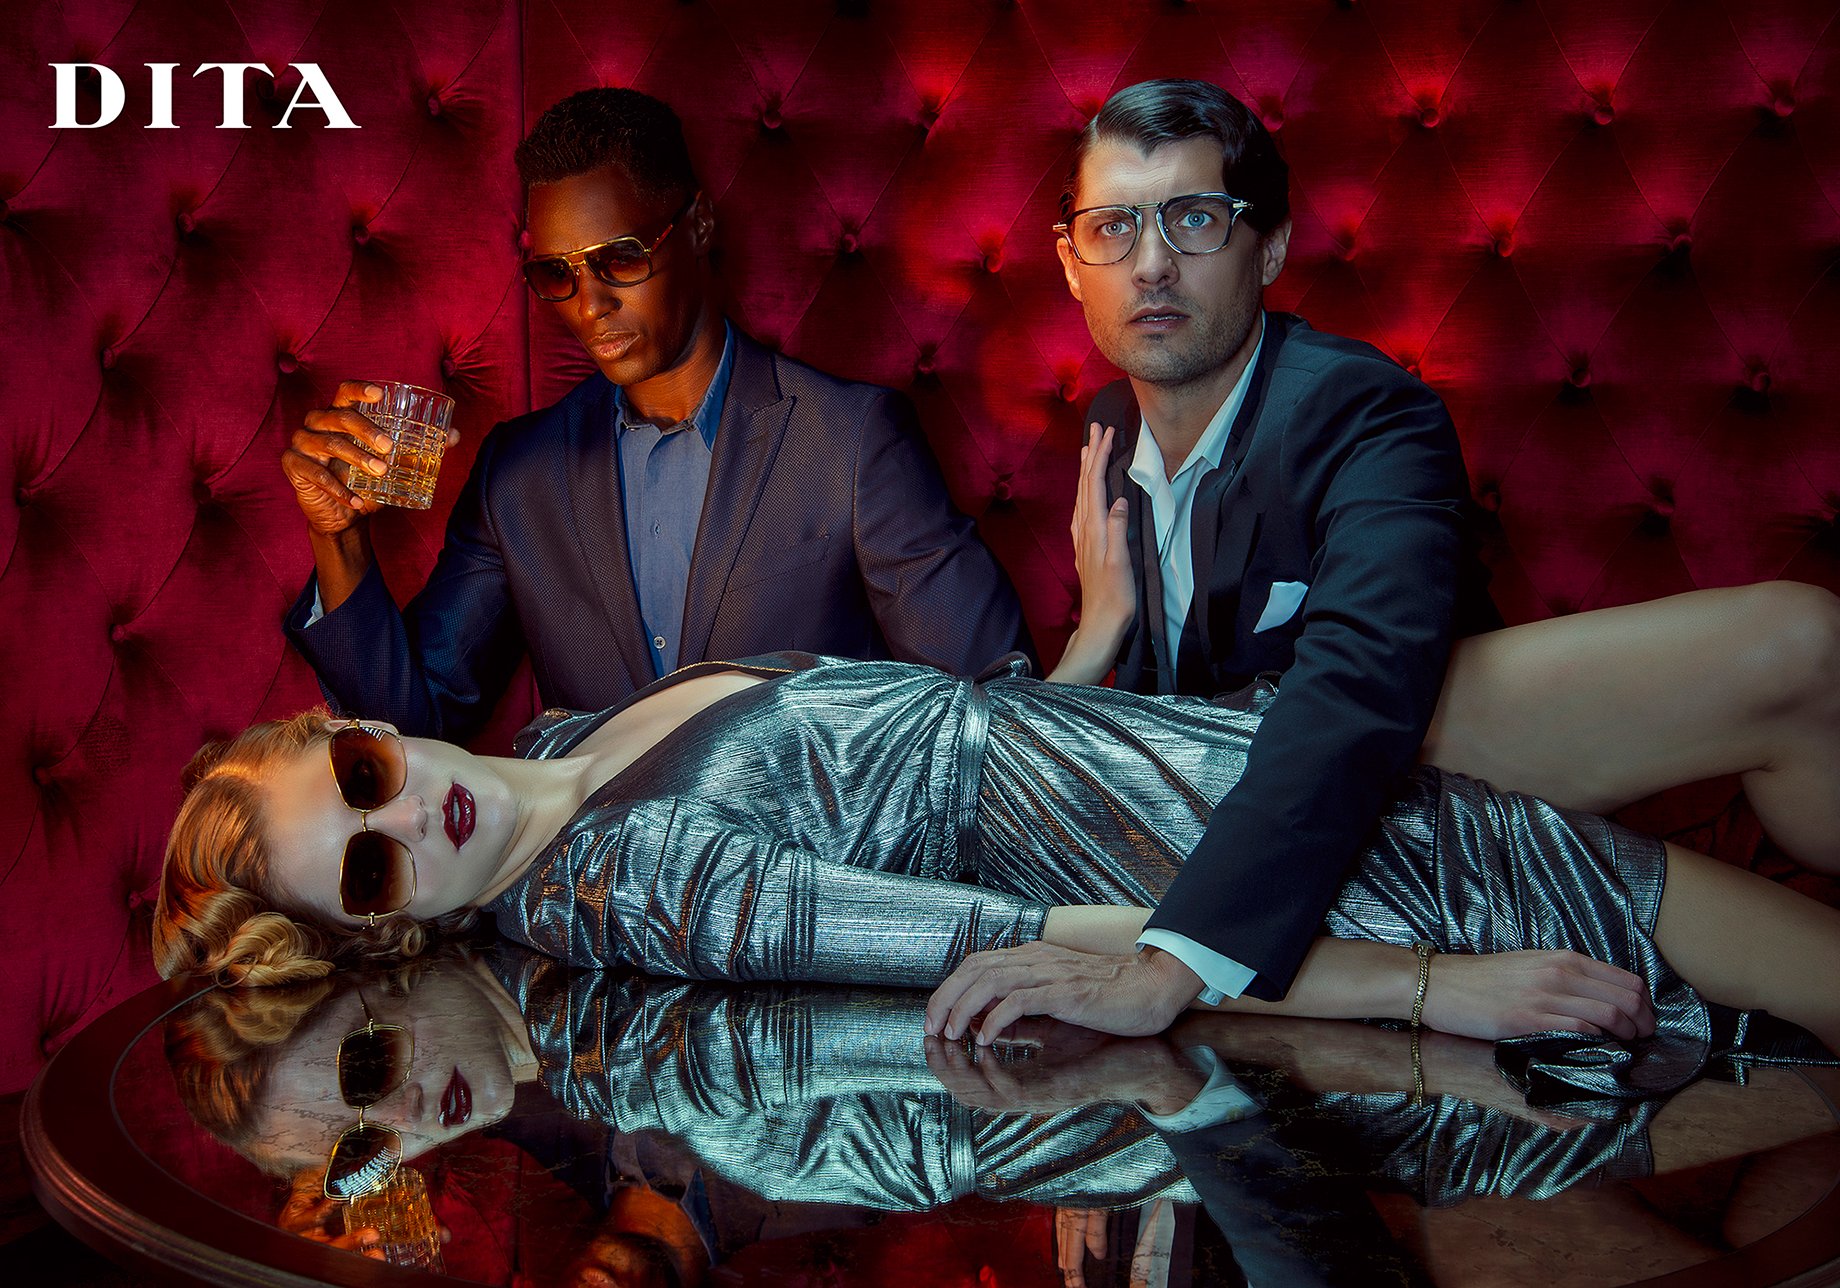 Woman wearing sunglasses, blonde pin curls, and silver cocktail dress lays on table in front of two men in suits and glasses shot by Greg Miles for Dita Eyewear